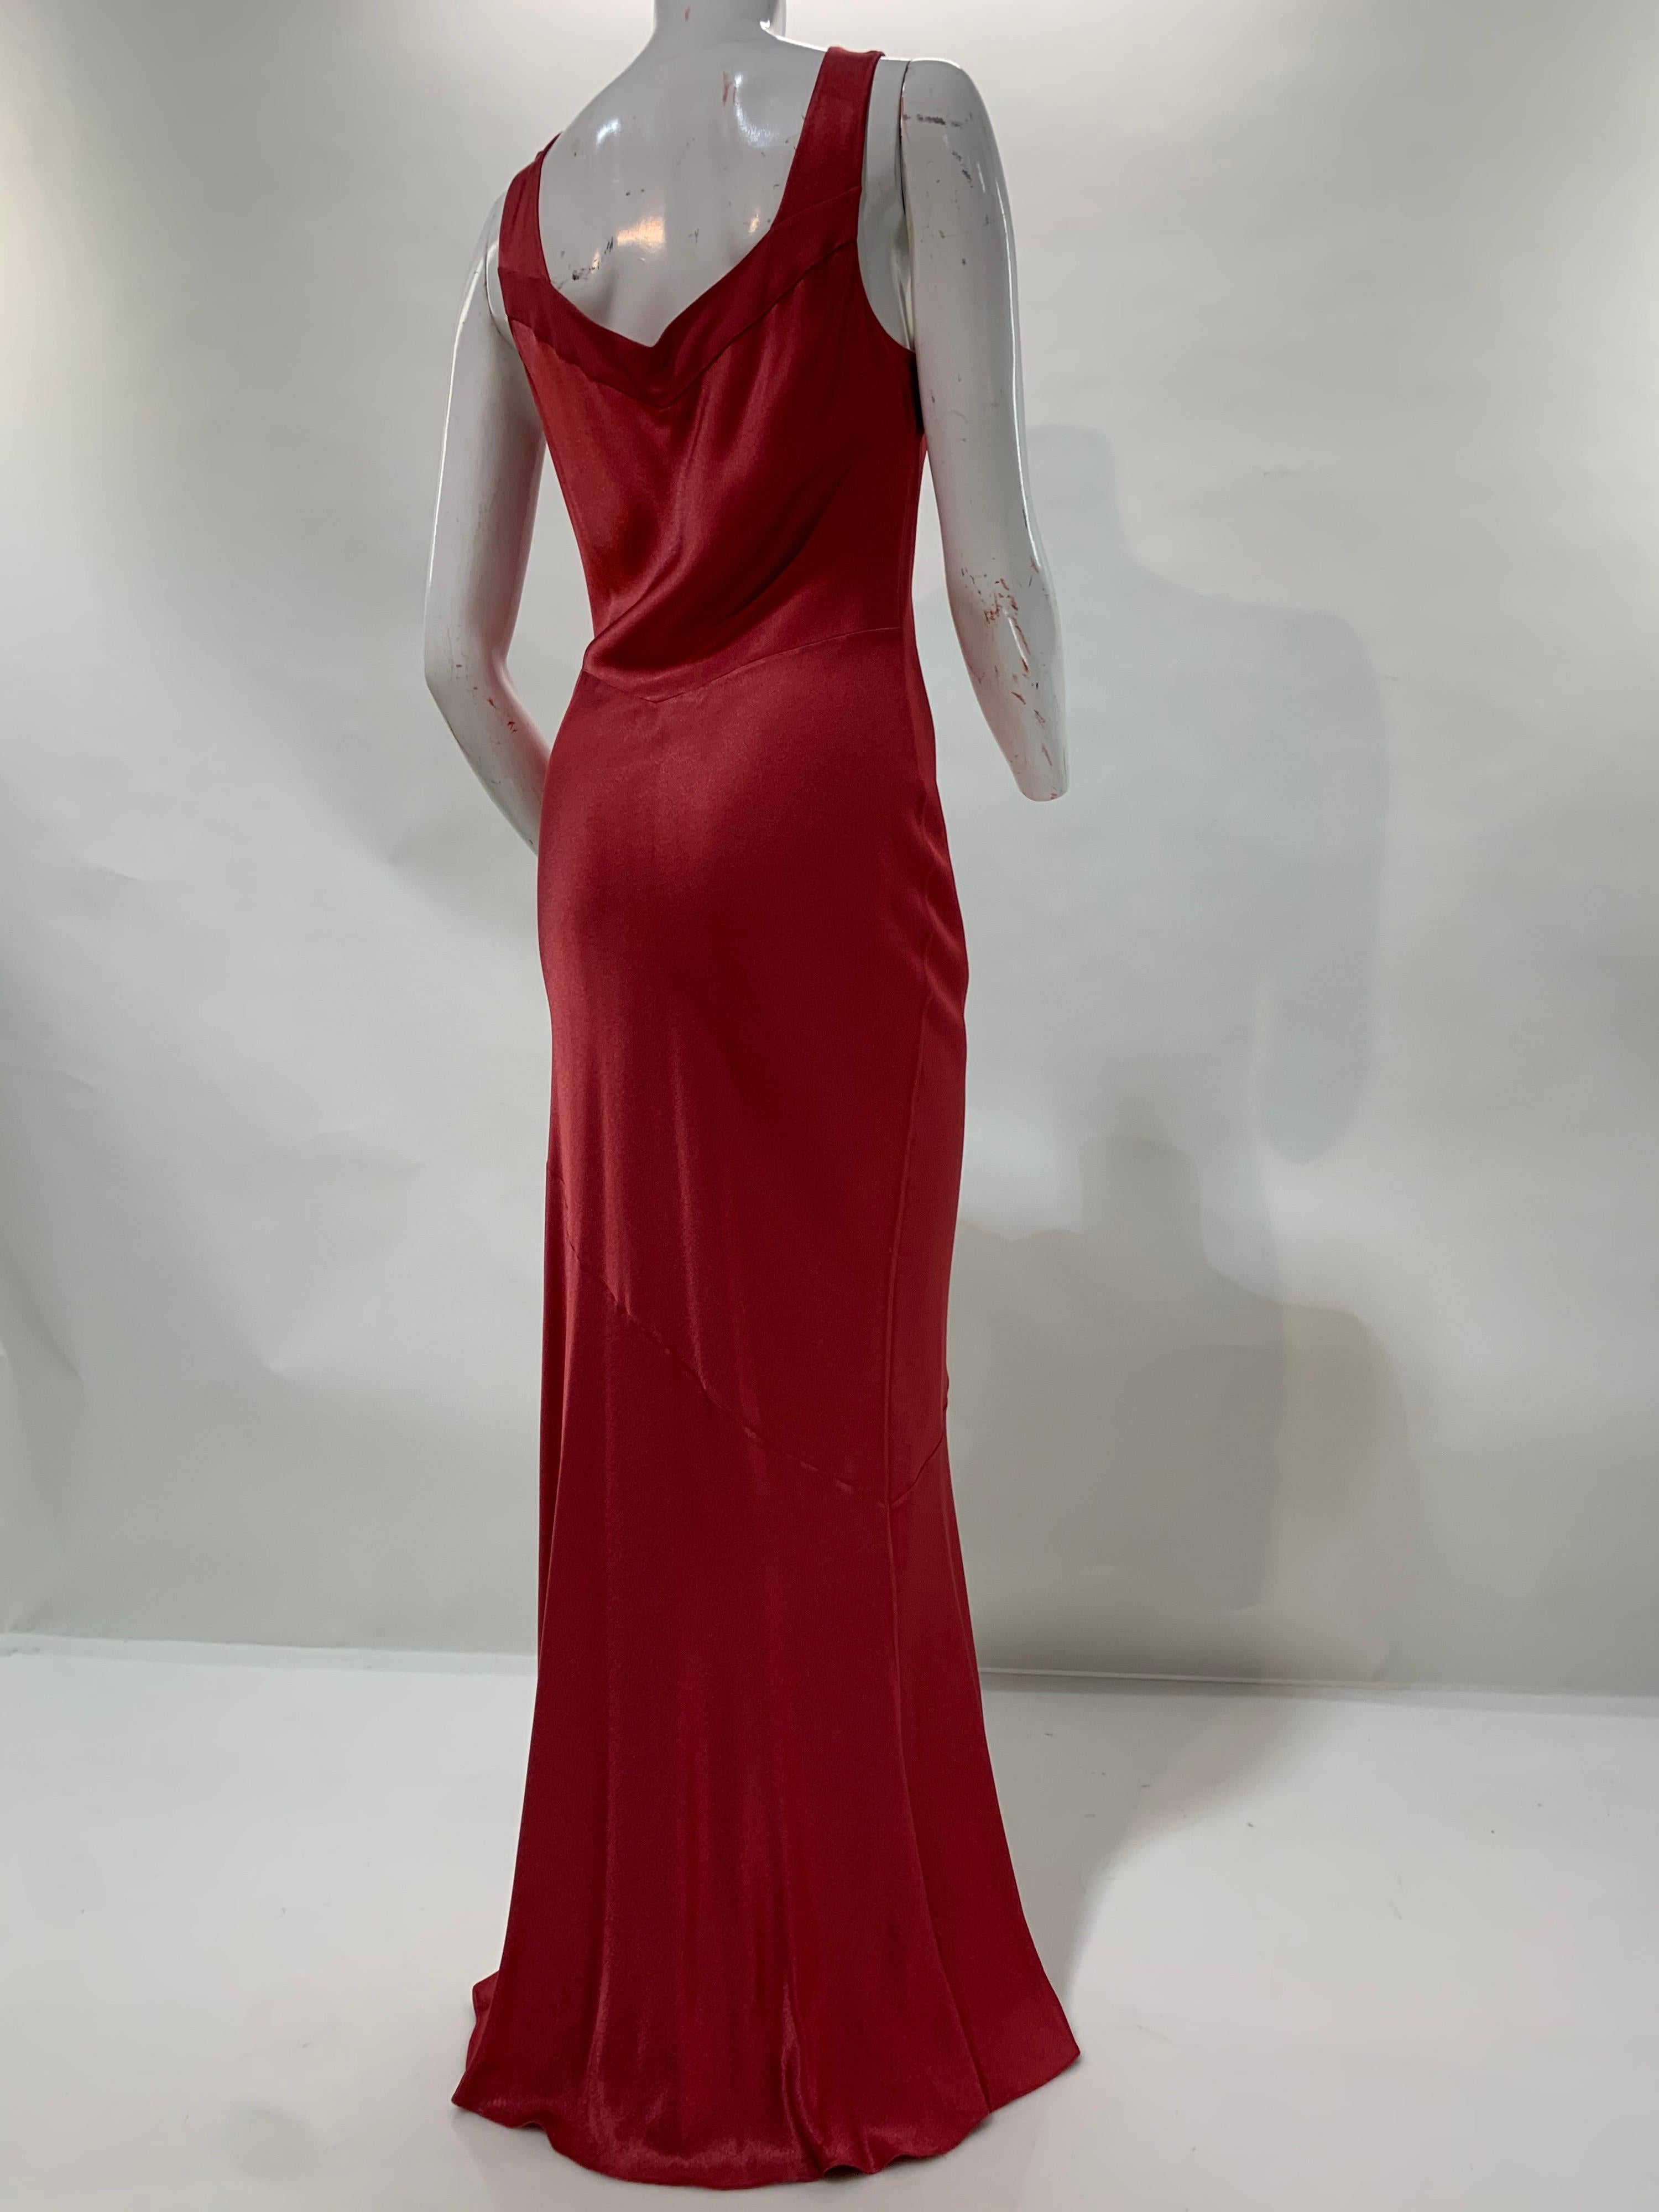 A 21st century John Galliano raspberry red body-conscious, bias-cut, crepe-backed, satin gown with flared train and side slit. So simple. So sexy. Size 8.